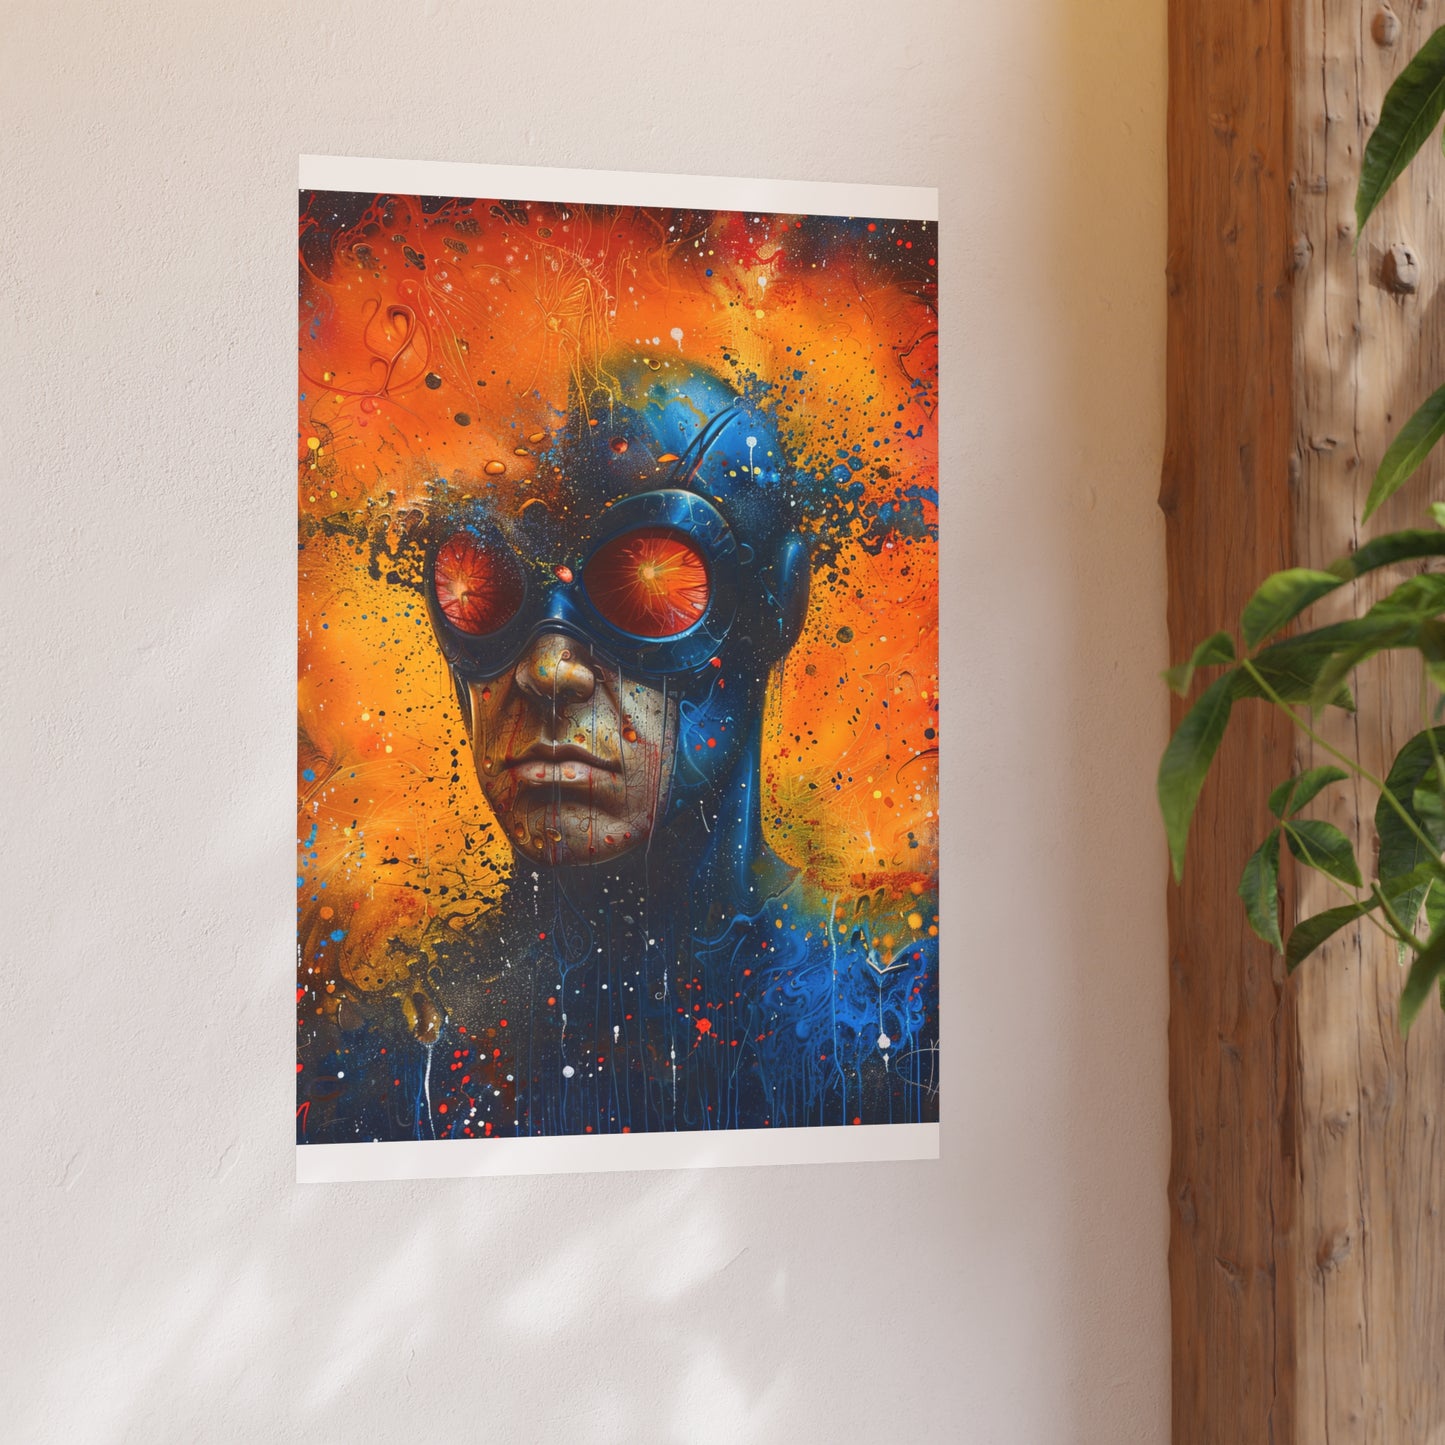 Satin and Archival Matte Posters: Cyclops (inspired by Marvel)